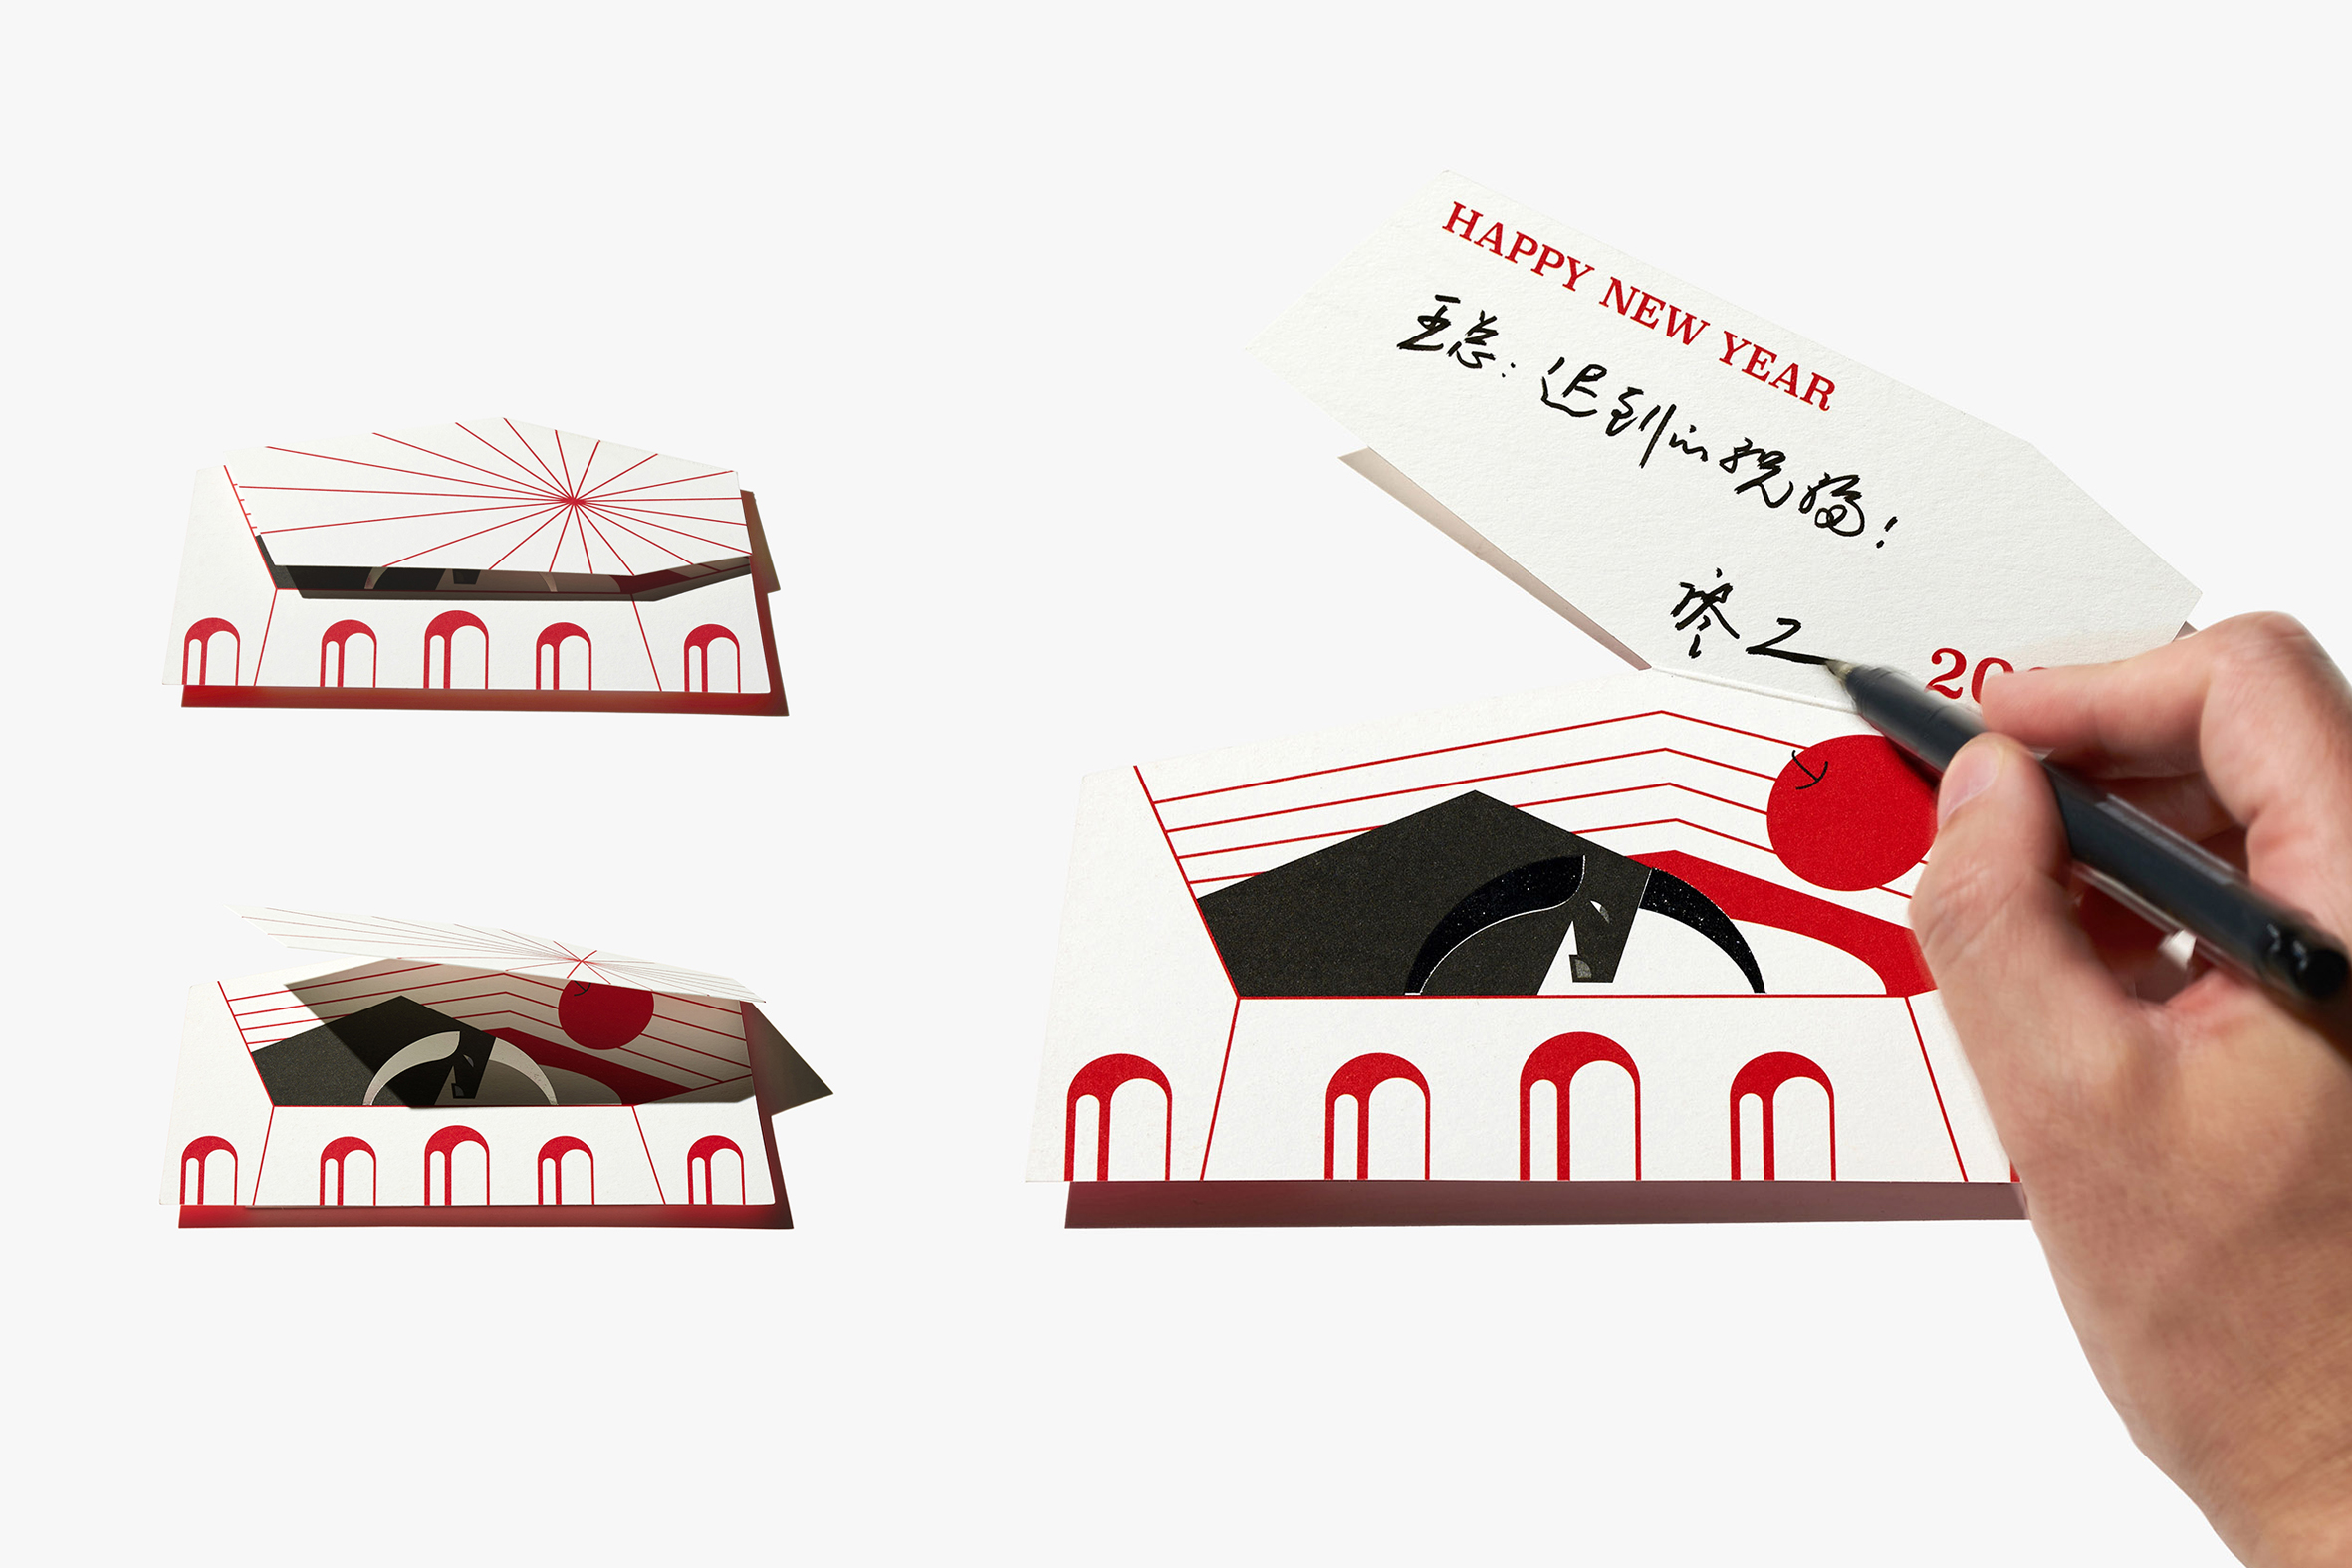 Packaging design for apples in the year of the Ox